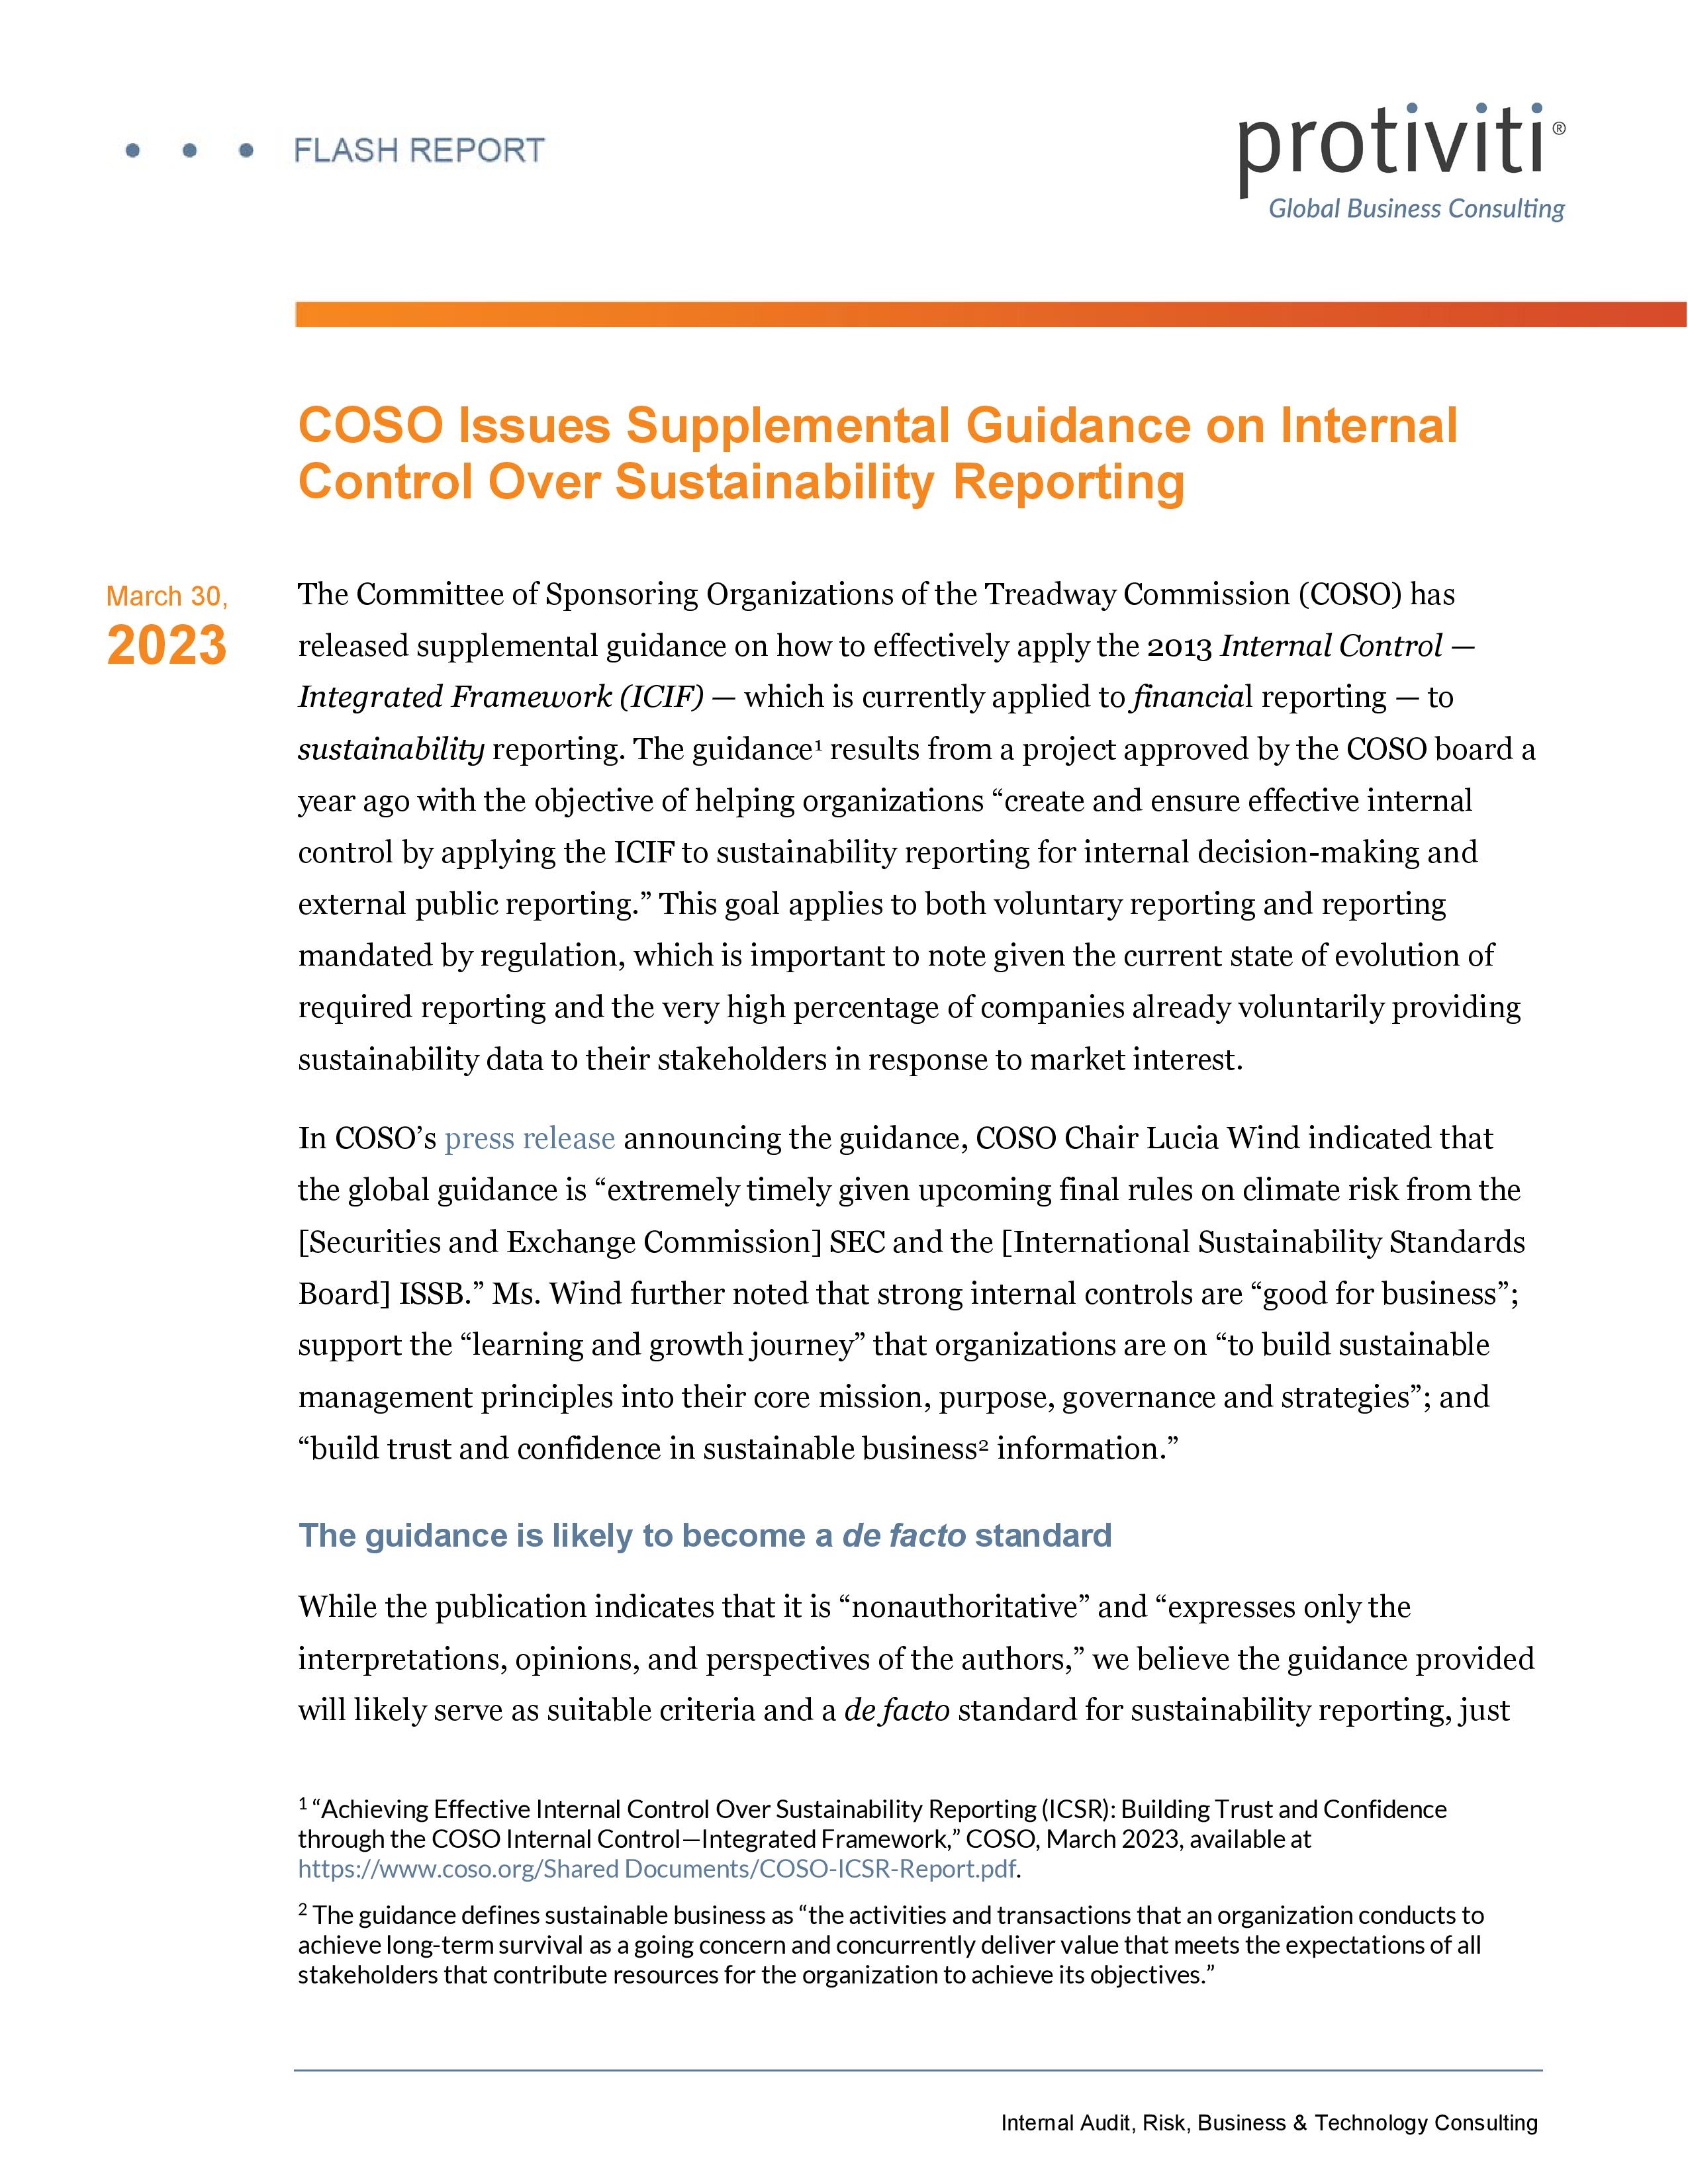 Screenshot of the first page of COSO Issues Supplemental Guidance on Internal Control Over Sustainability Reporting